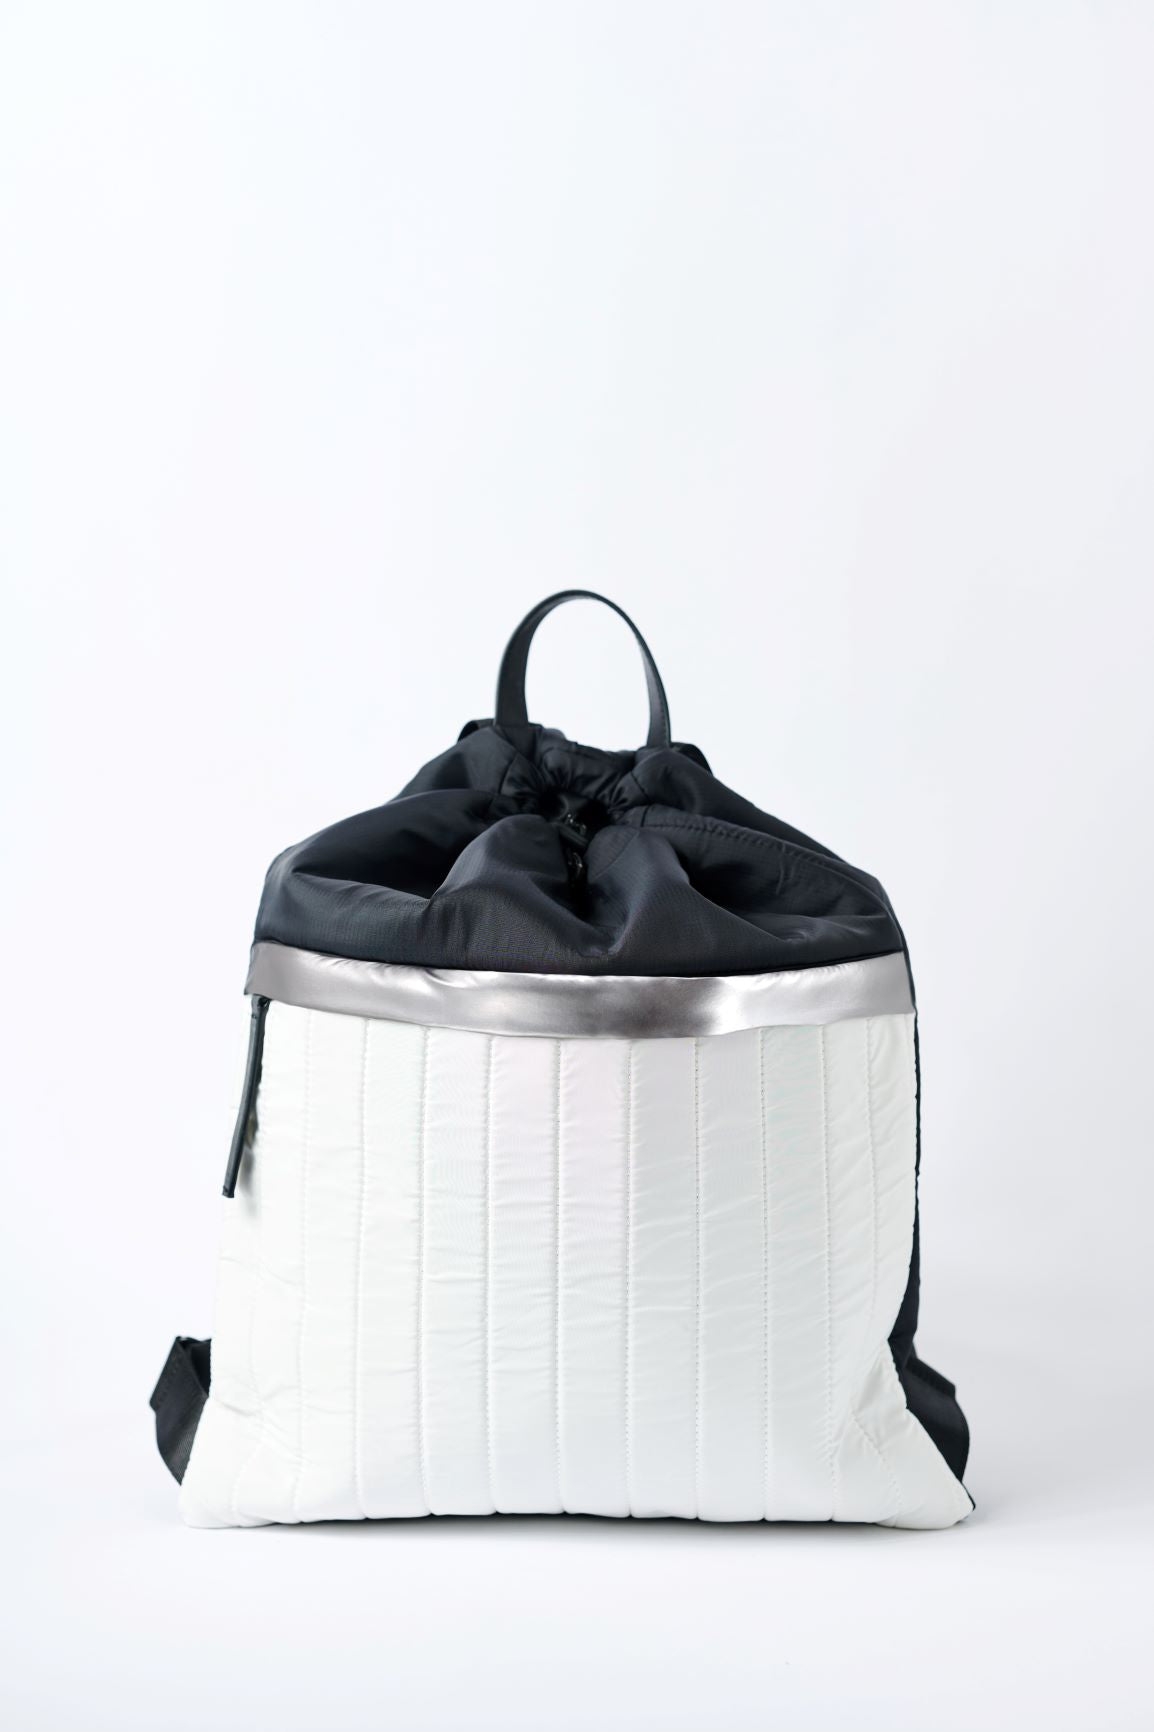 Black & white nylon cinch top backpack with signature leather and shiny silver details.